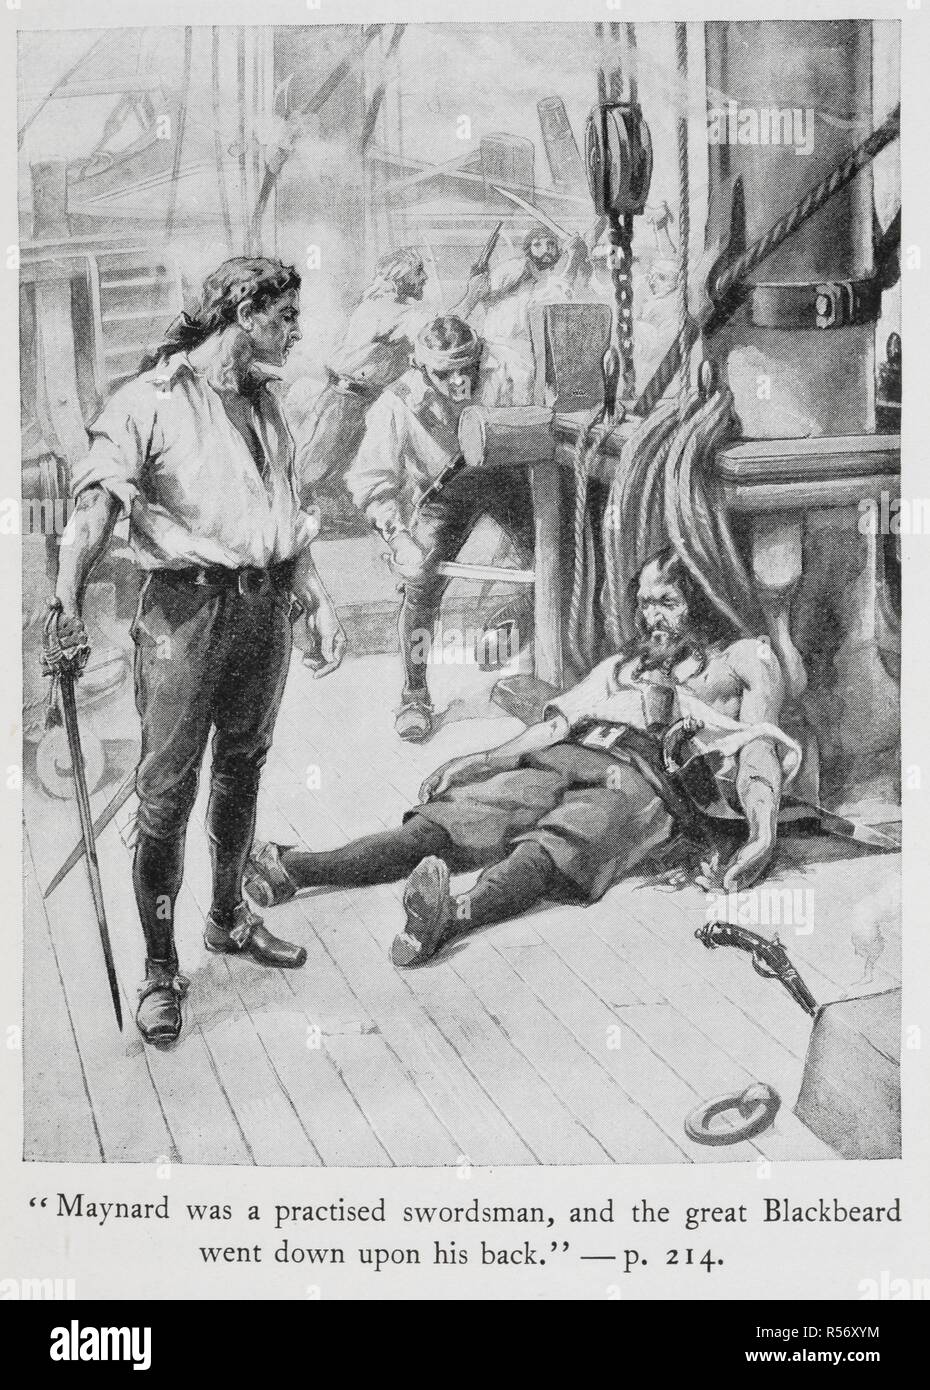 'Maynard was a praticed swordsman, and the great Blackbeard went down on his back'. The killing of Blackbeard by Lieutenant Robert Maynard.  . Buccaneers and Pirates of our Coasts ... New York, 1898. Source: 9770.aa.8, opposite 214. Author: Stockton, Frank Richard. Stock Photo